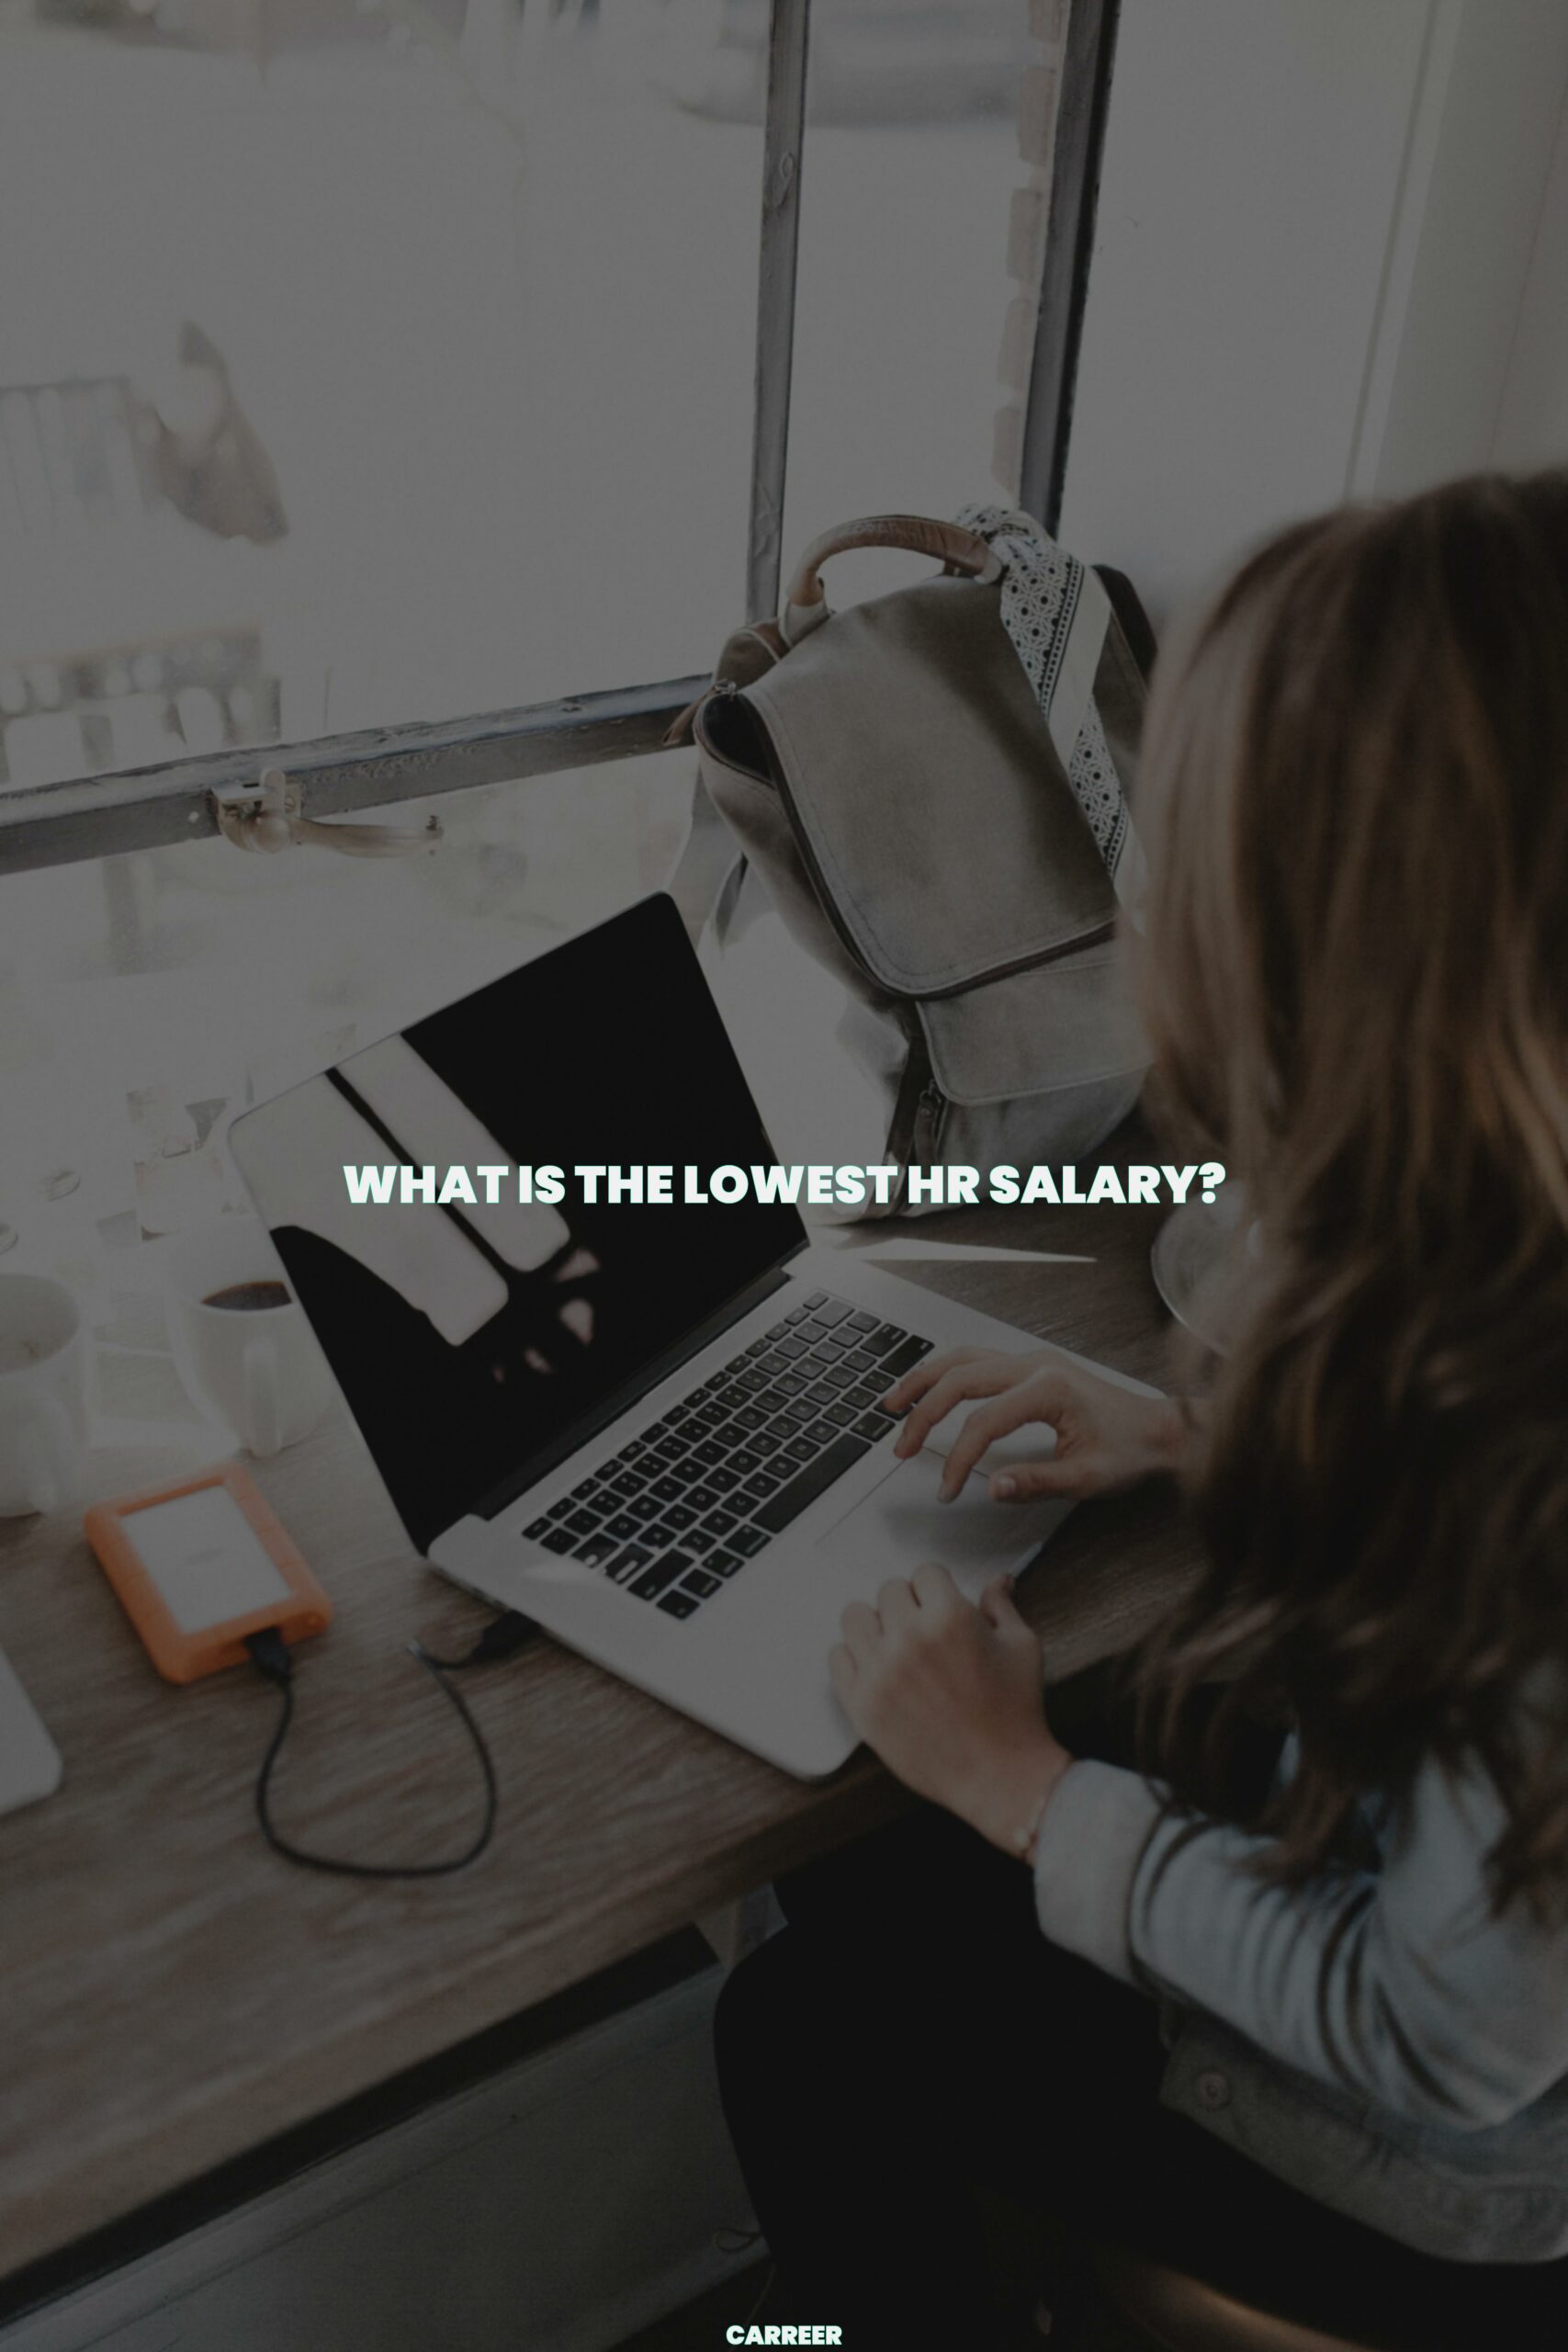 What is the lowest hr salary?